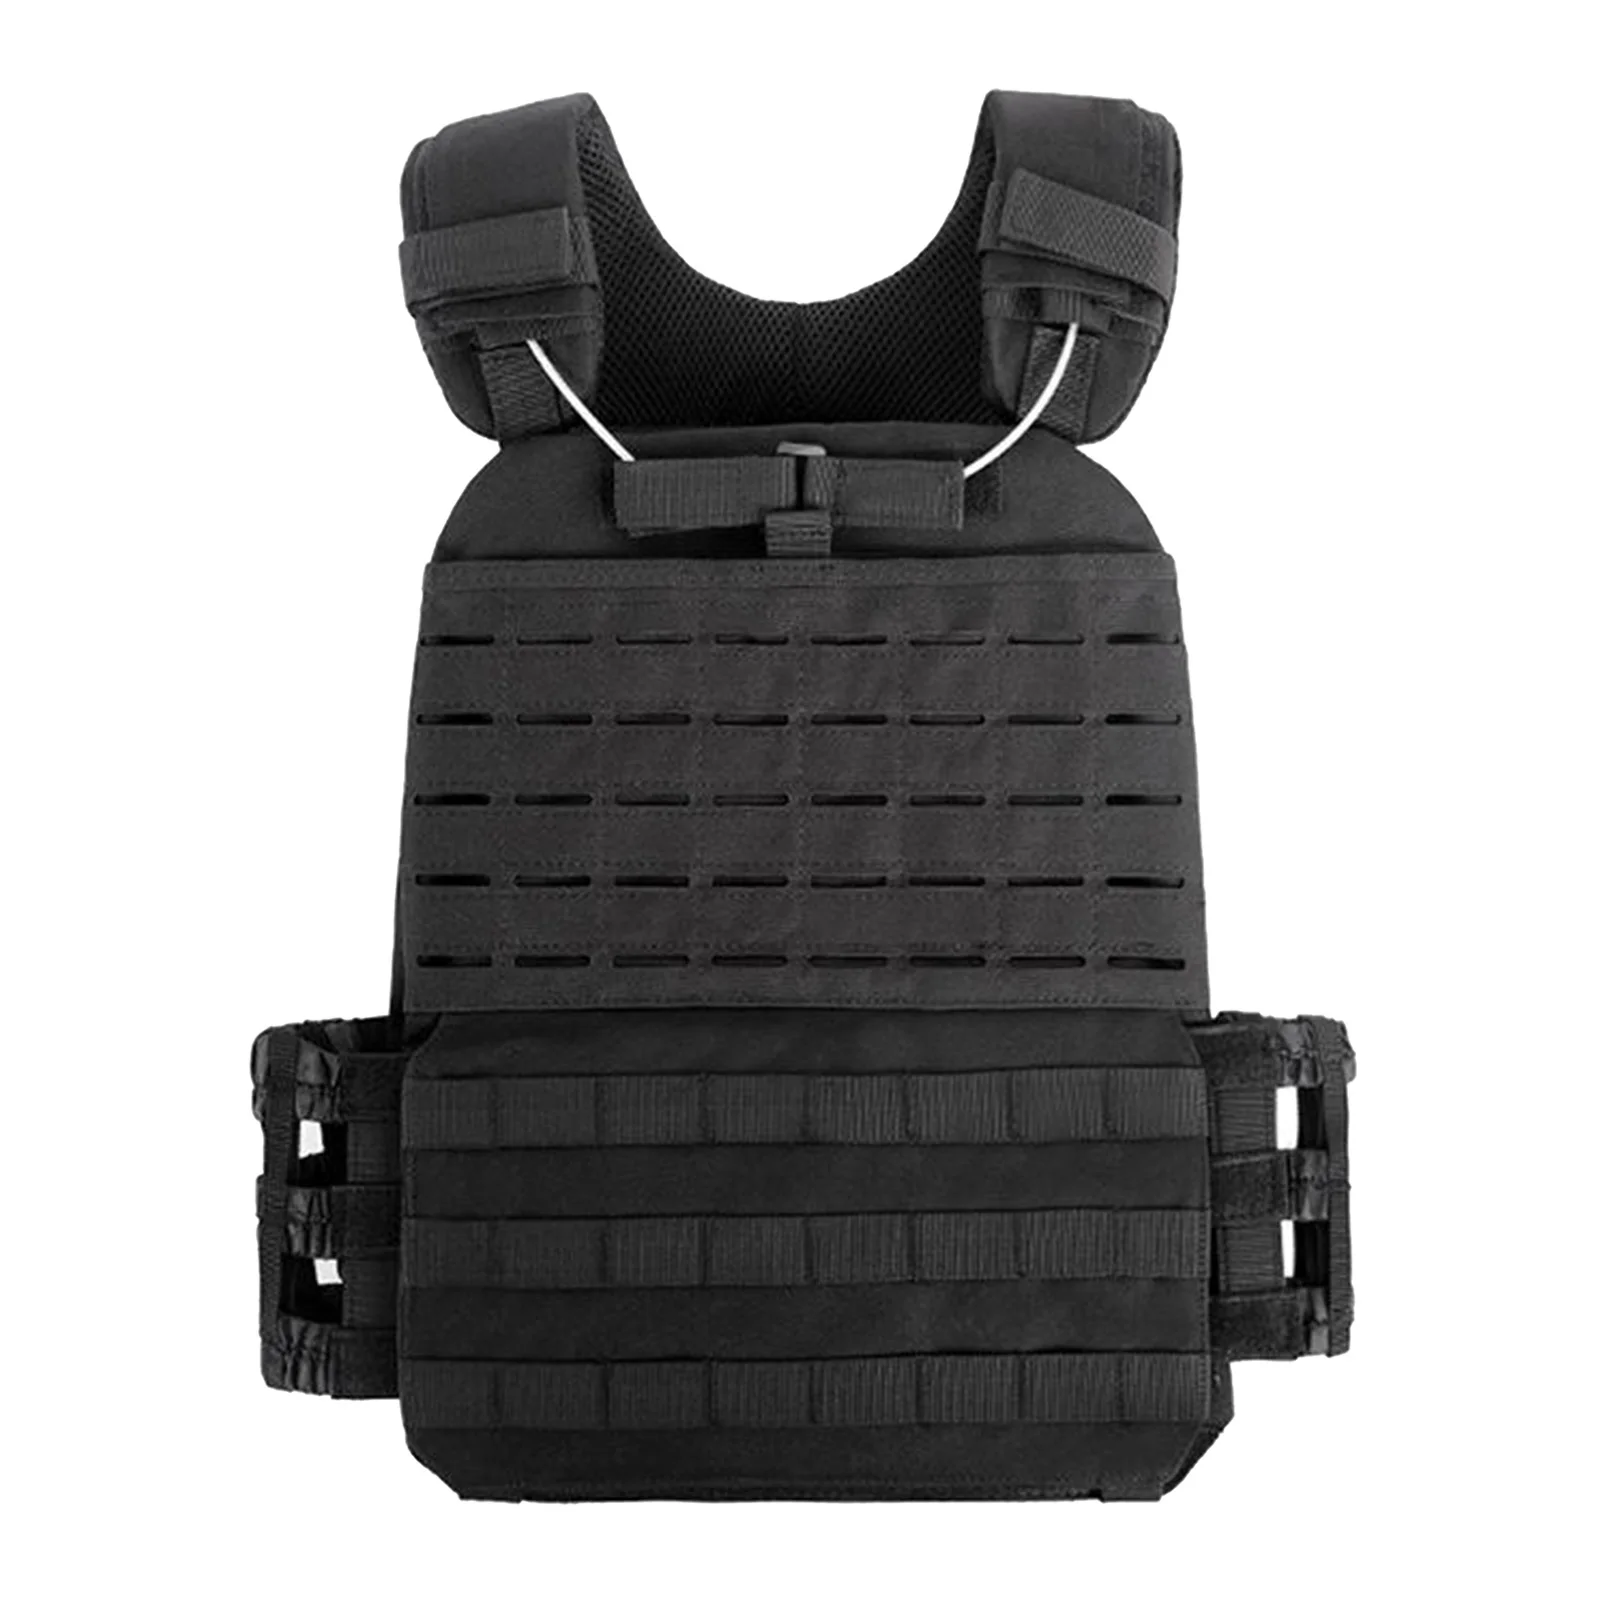 Tactical Vest Military Molle Combat Hunting Hiking Training Vest